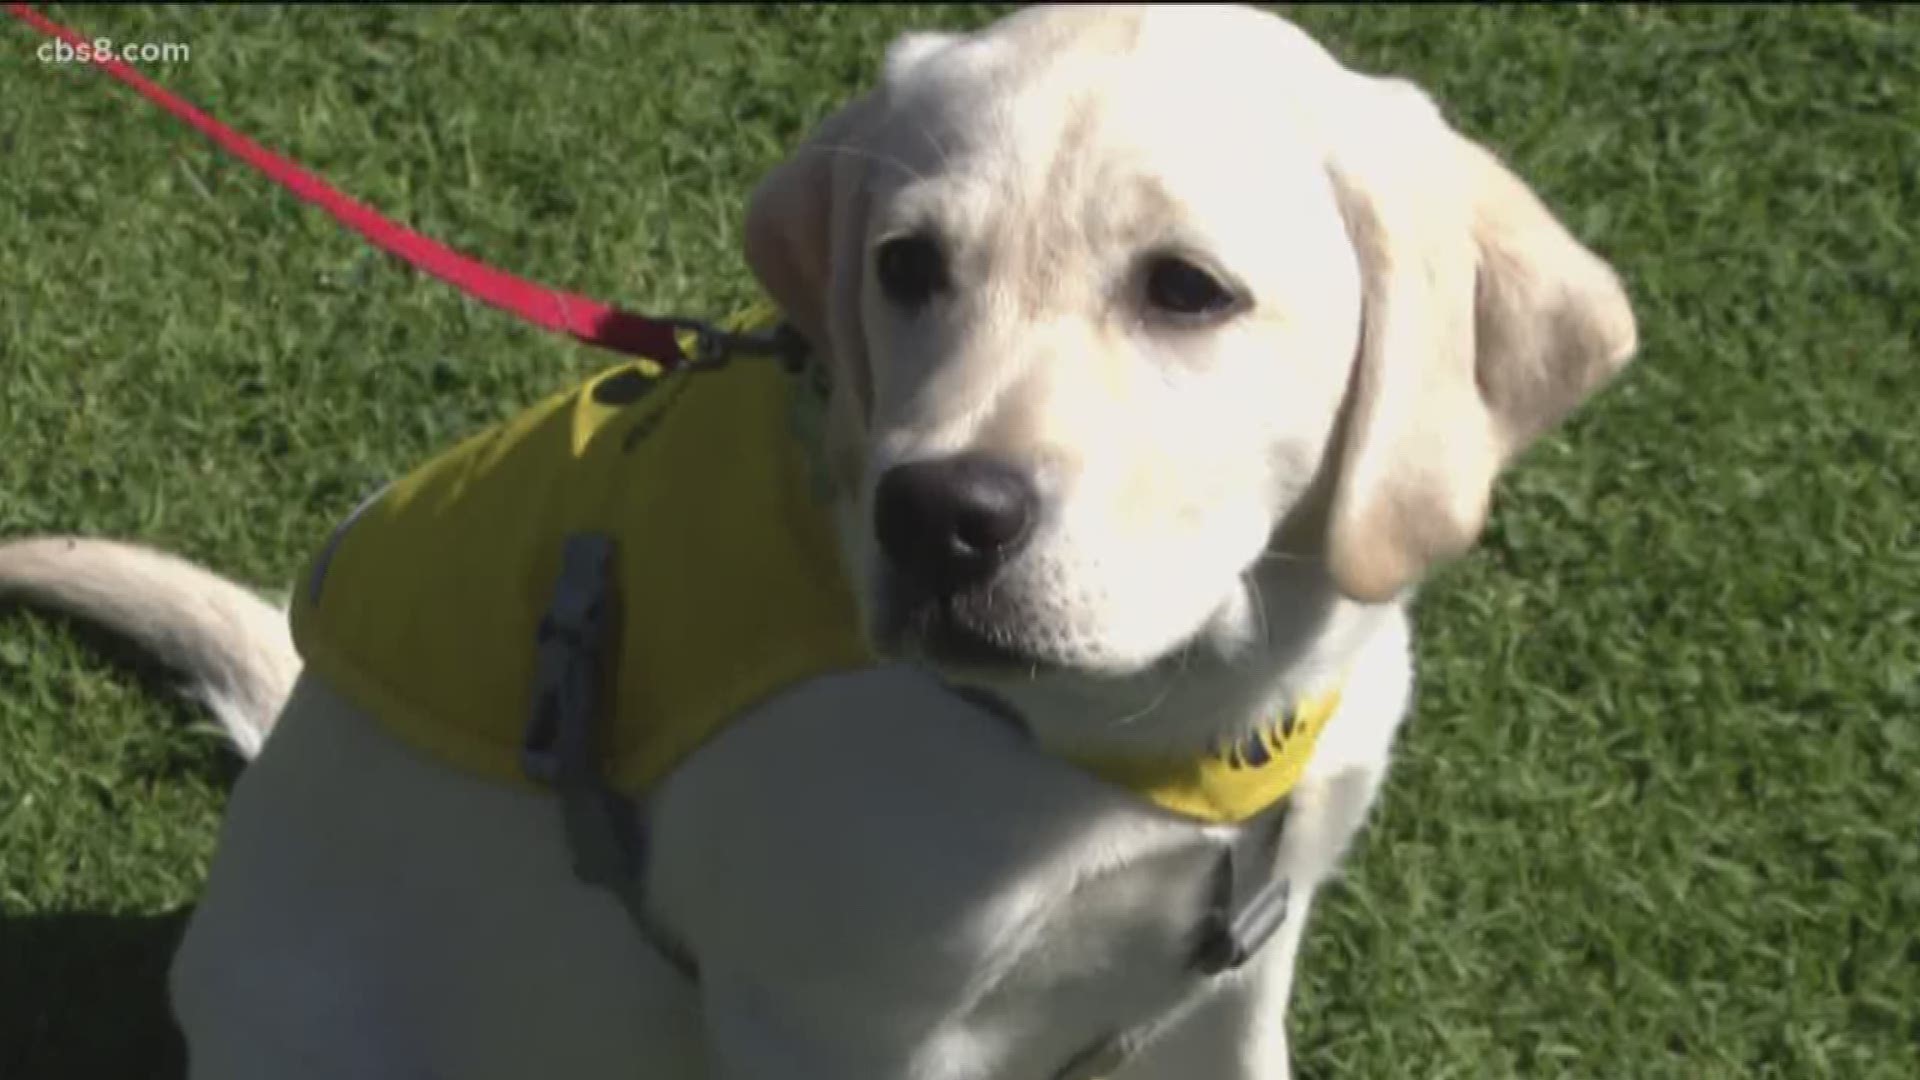 Coronado family trains puppies to be guide dogs for blind